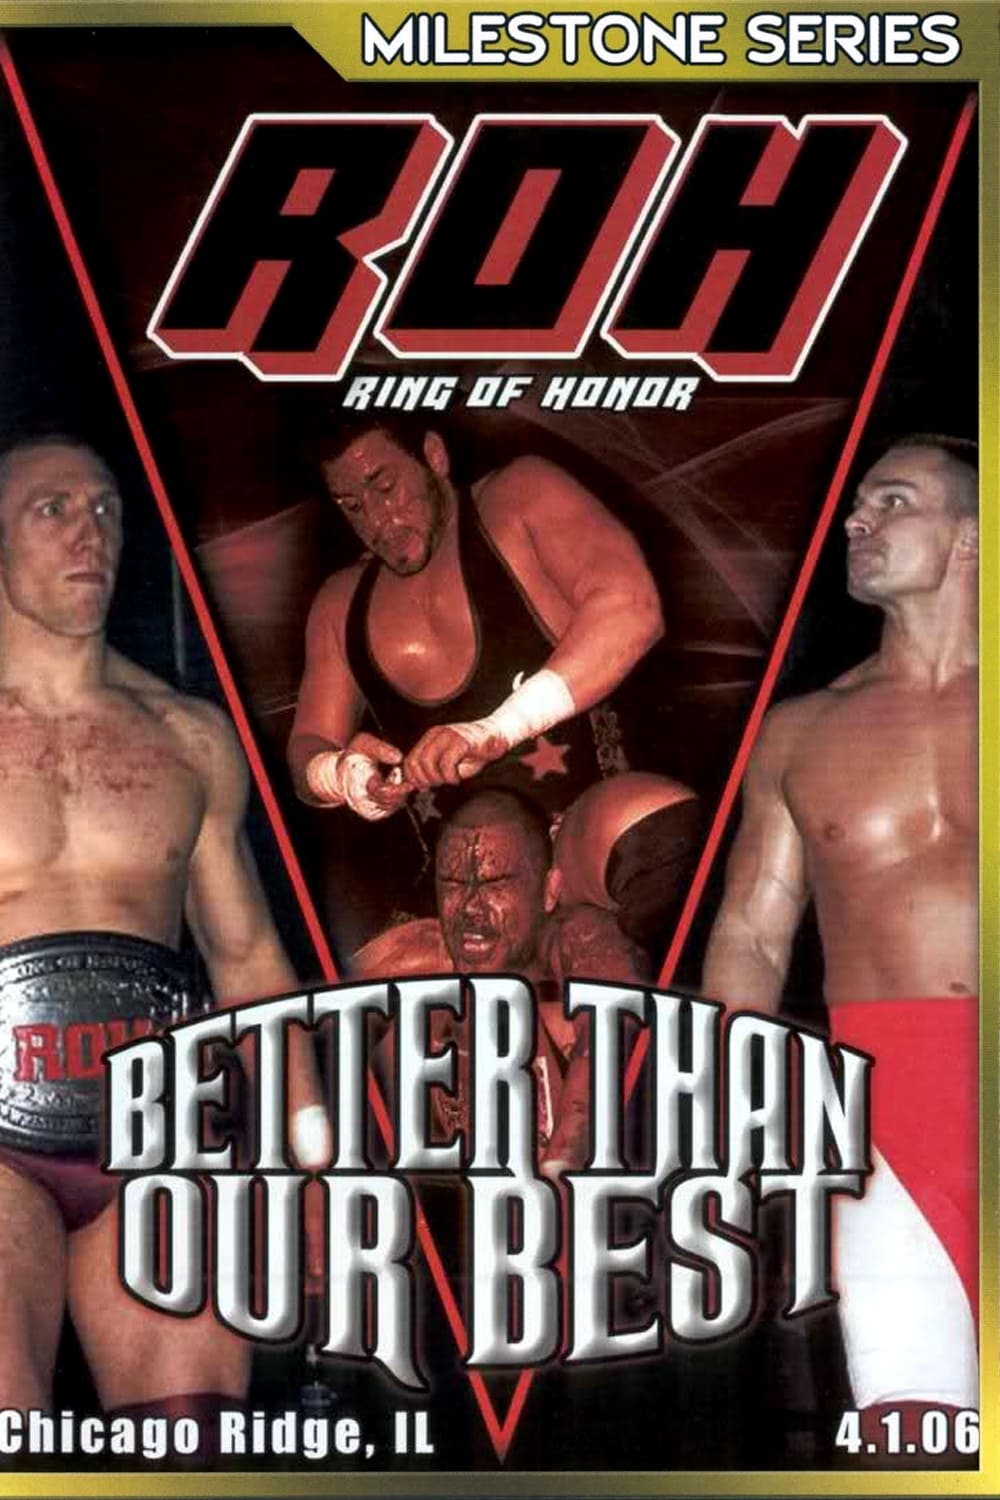 ROH: Better Than Our Best